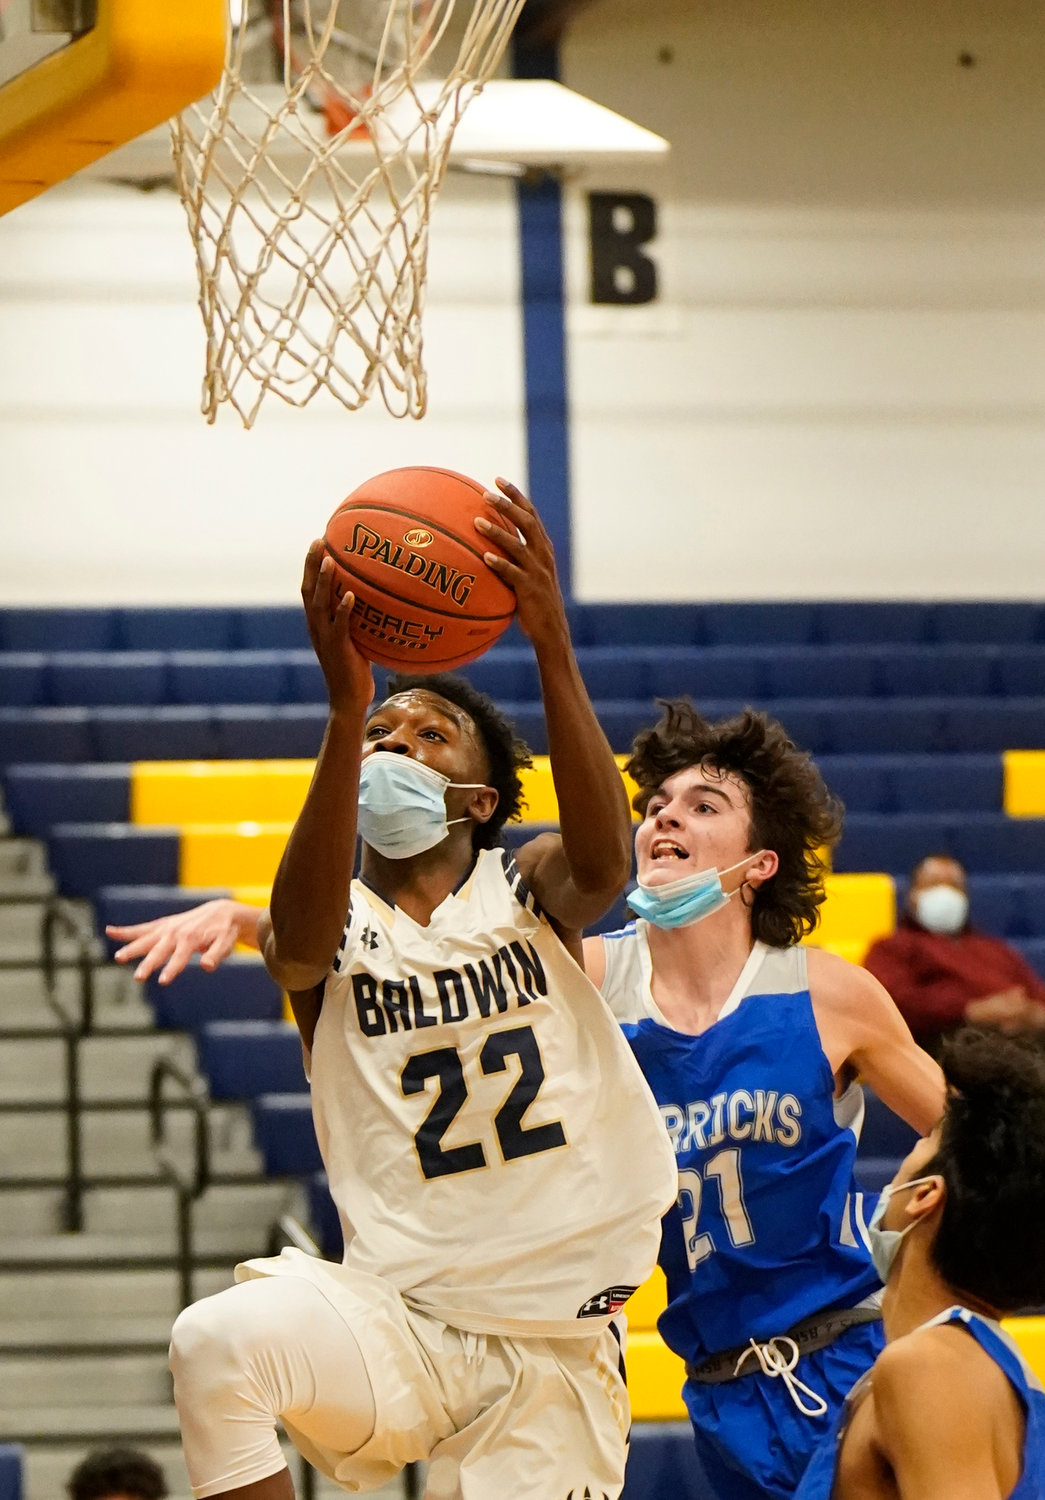 Senior Gerrard Beaubrun had 10 points, 7 rebounds and 4 assists as the Bruins beat Bishop Loughlin, 71-68, as part of the Gary Charles Tip of the Hat Classic.